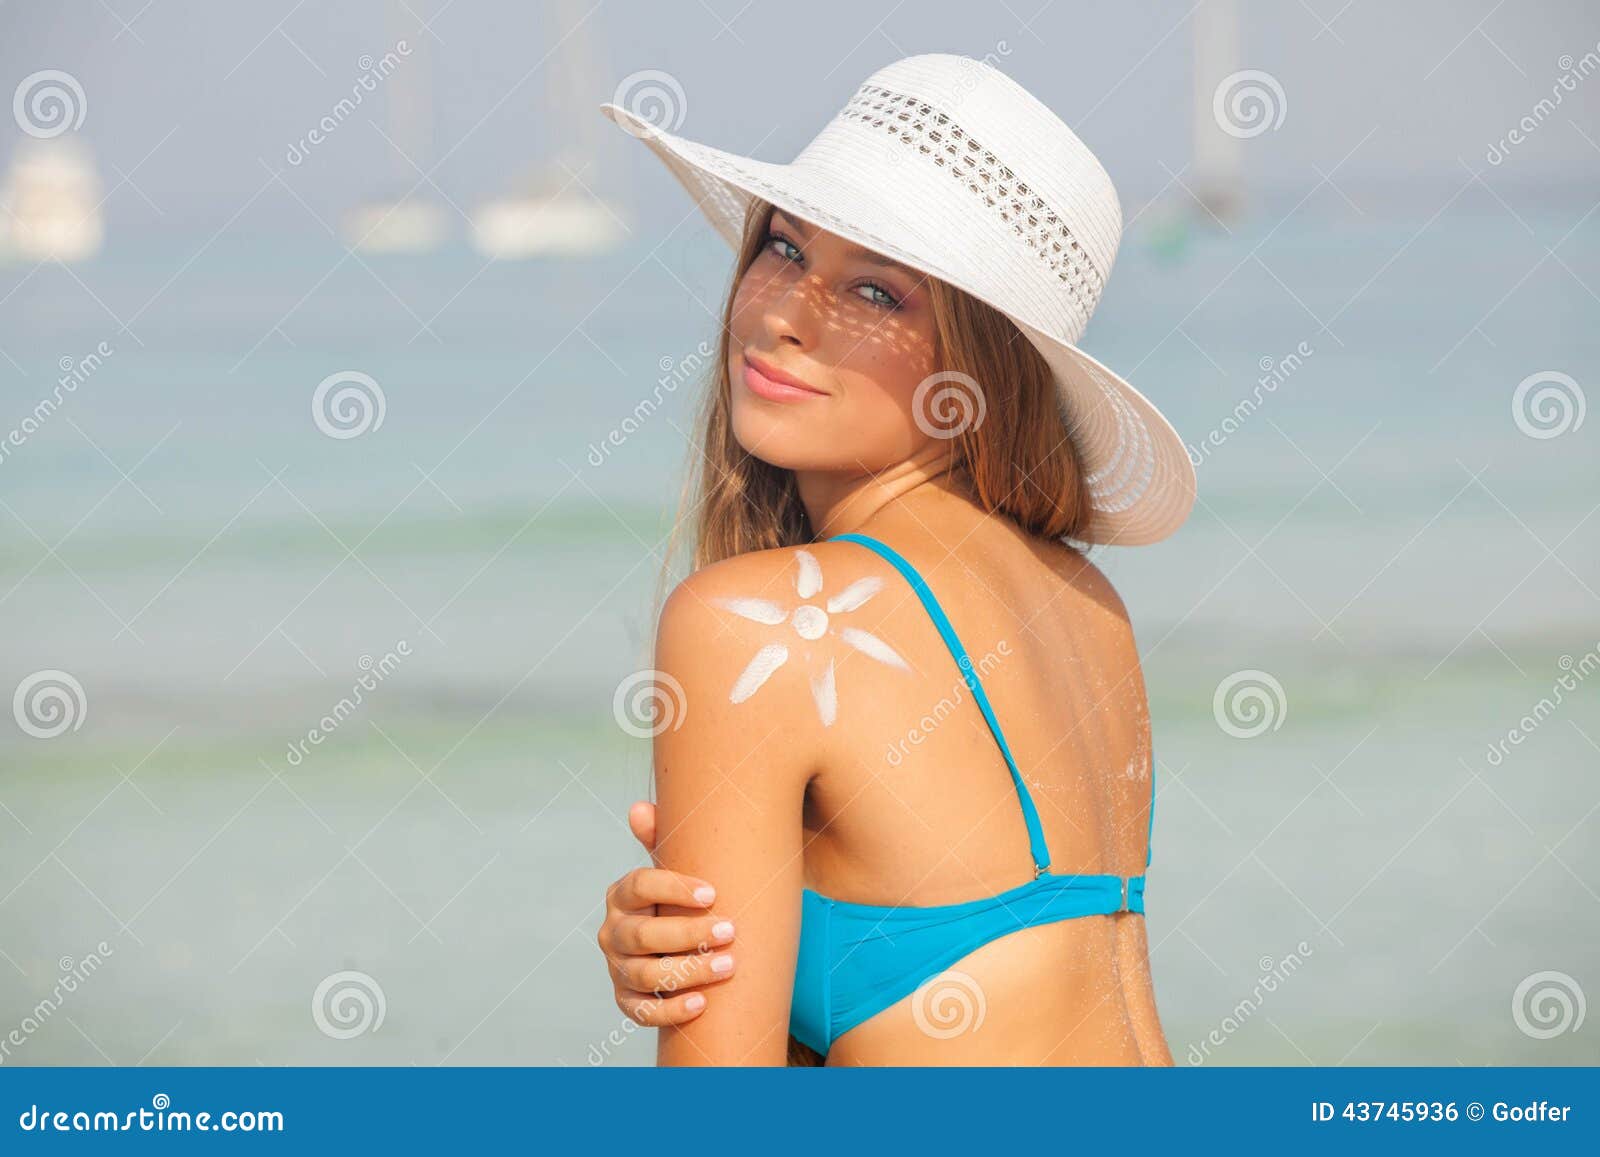 concept for safe sunbathing, woman with sun cream